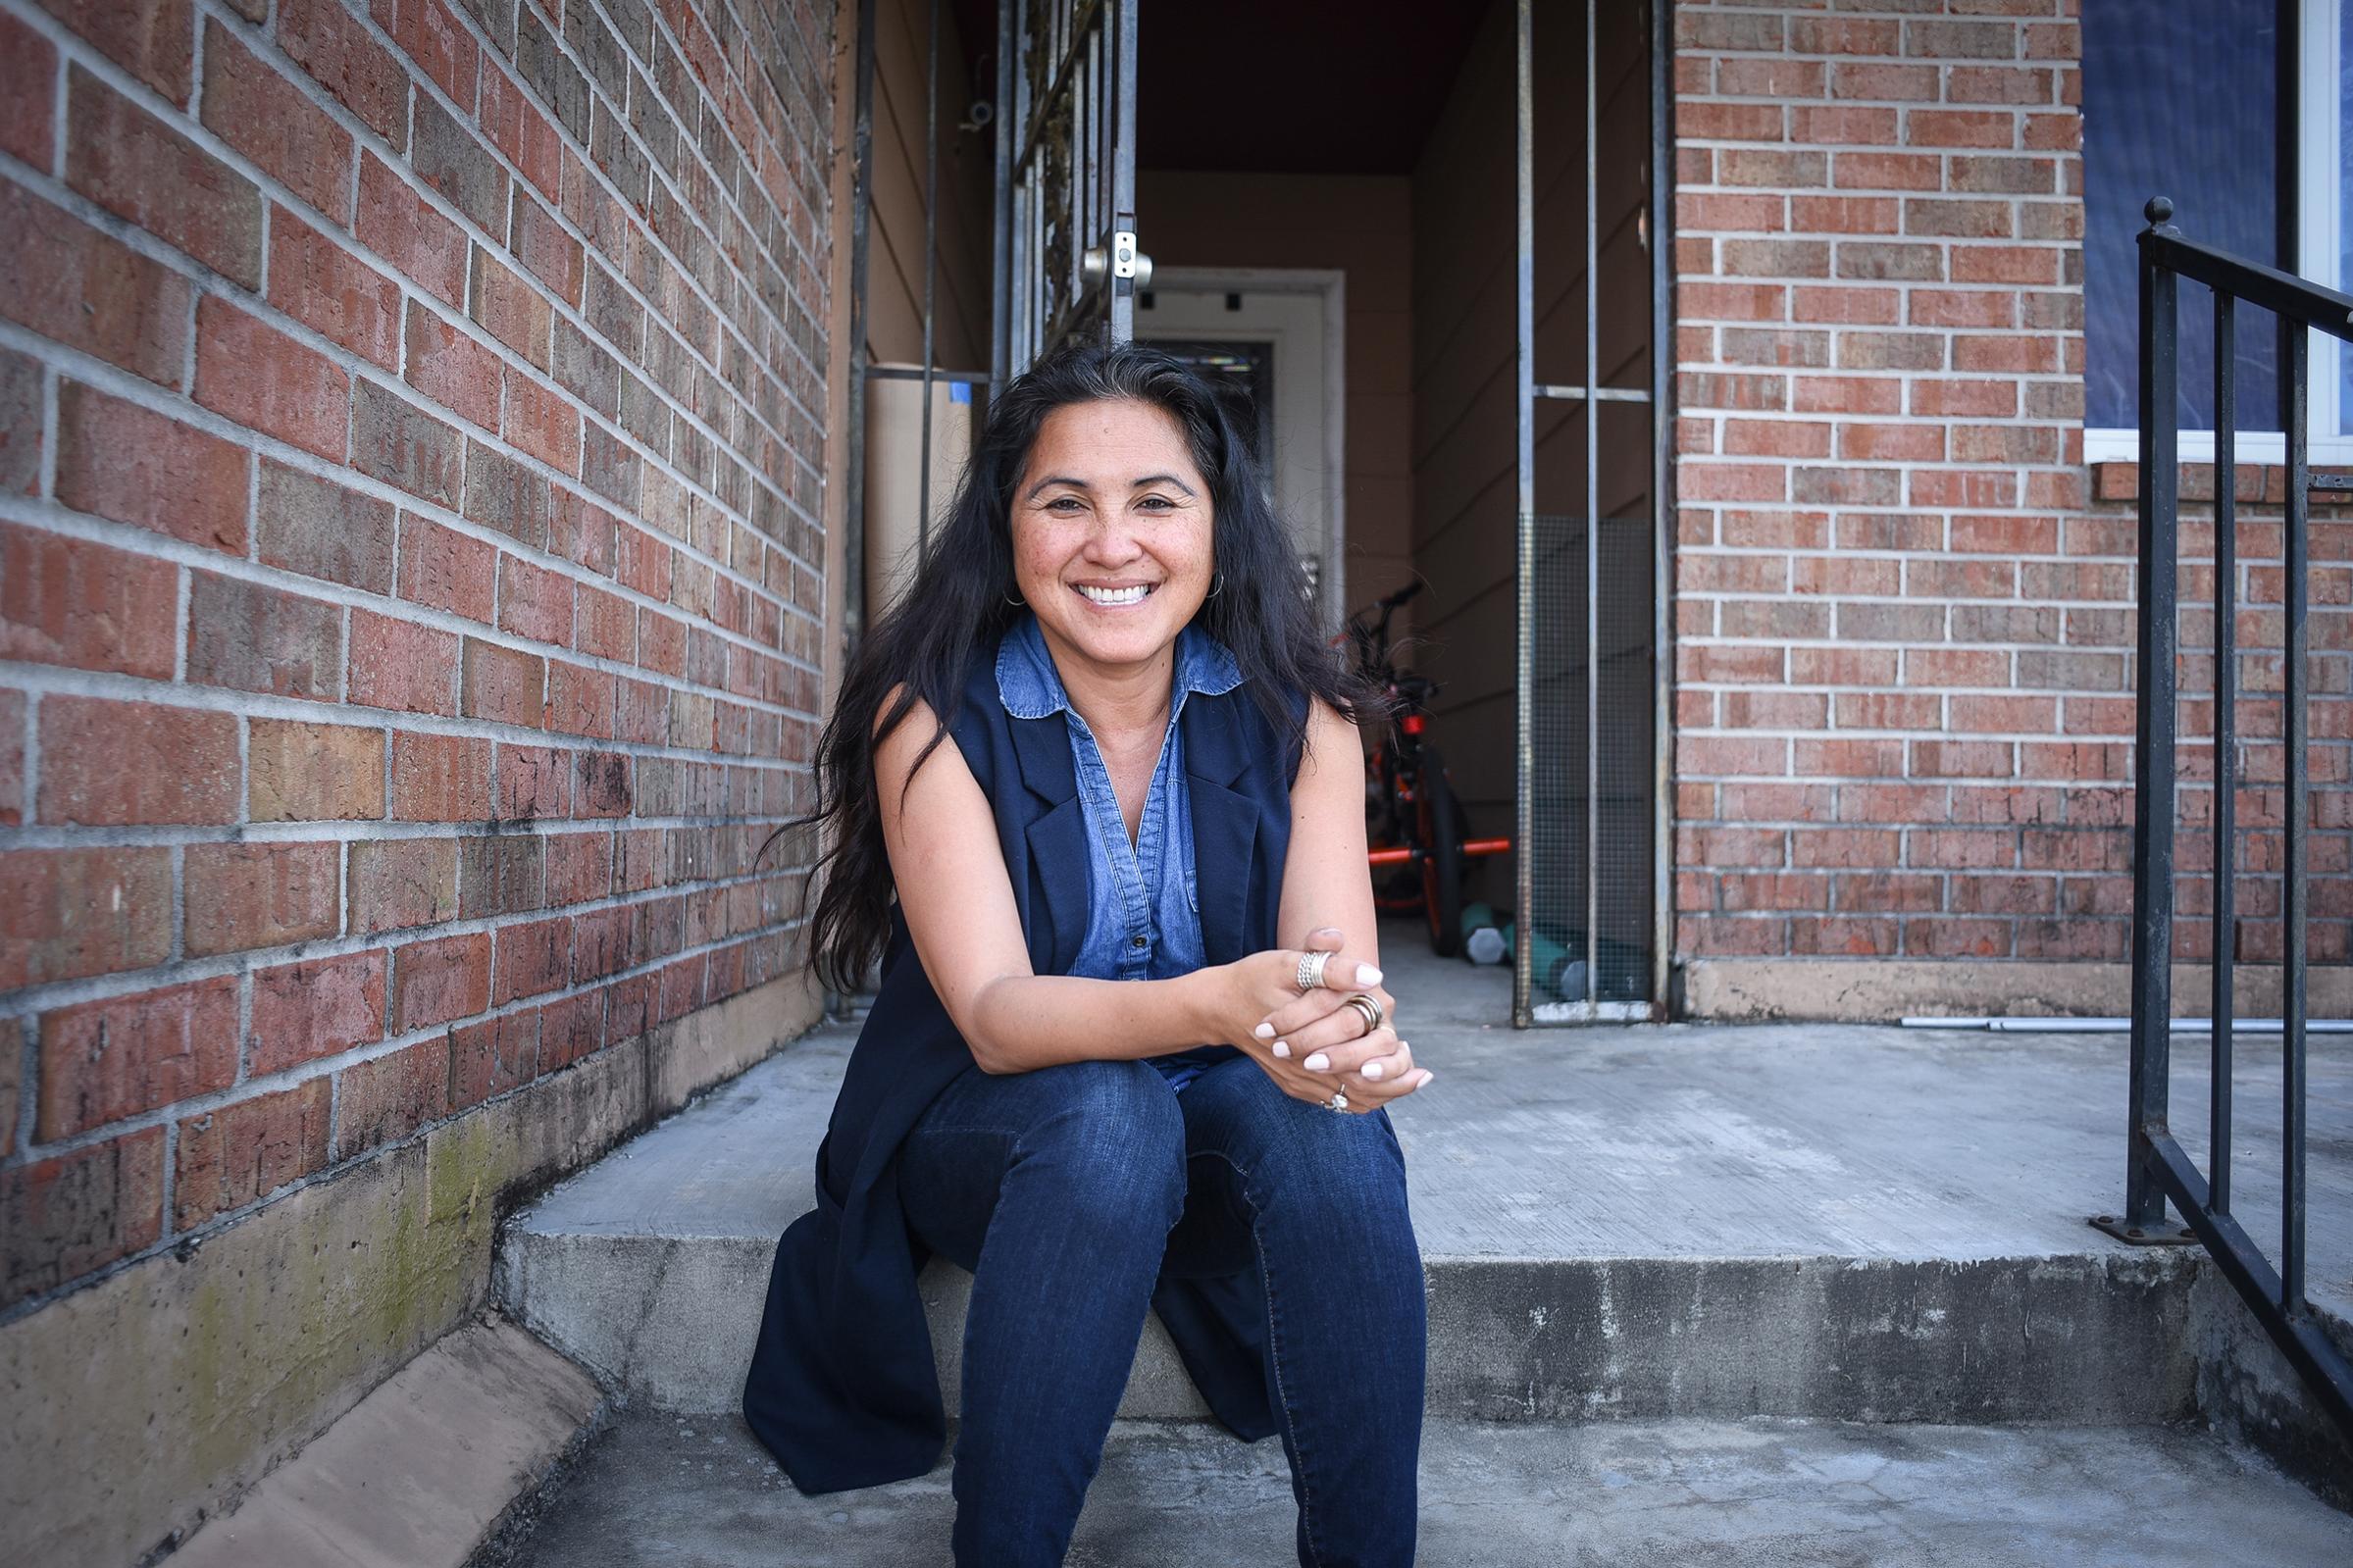 Cyndi Nguyen, who won a seat on the City Council in last year's election, outside her home in the Village de l'Est neighborhood of New Orleans, March 28, 2018.